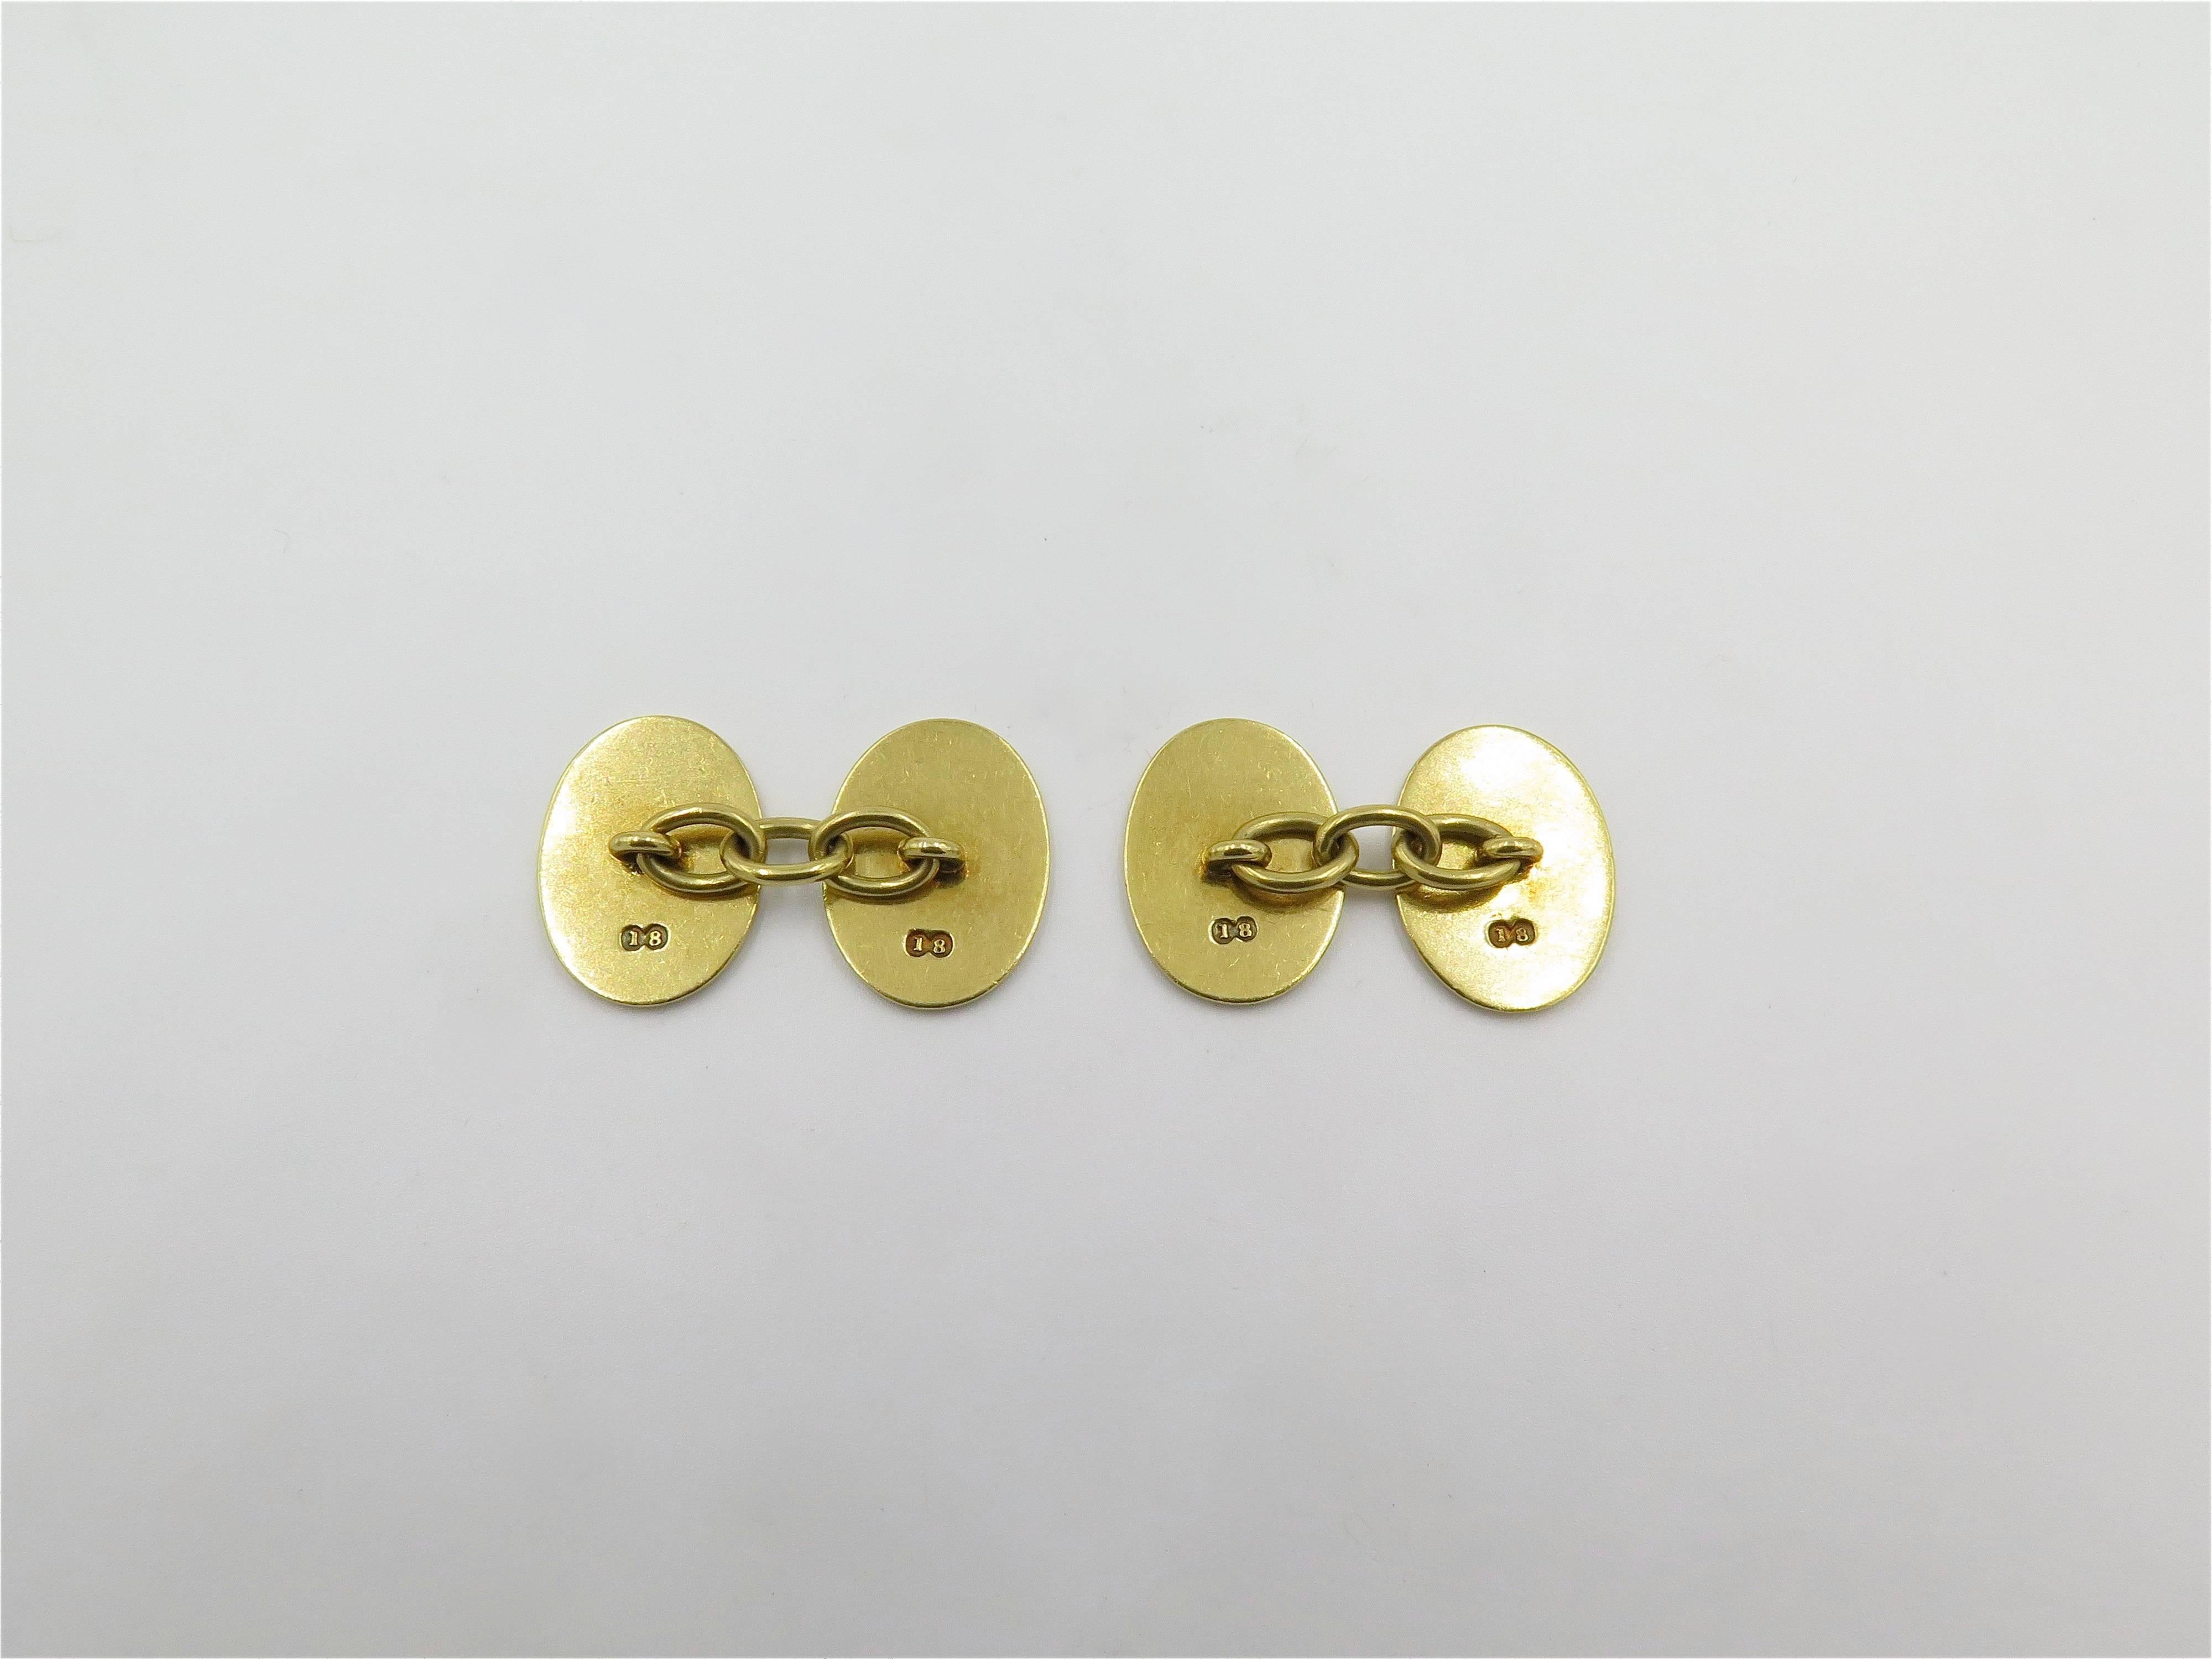 A pair of 18 karat yellow gold and enamel cufflinks. English. Each double link designed as an oval gold plaque, decorated with red, white and yellow enamel crests, celebrating the anniversary of the coup d'etat in Yugoslavia and the accession of